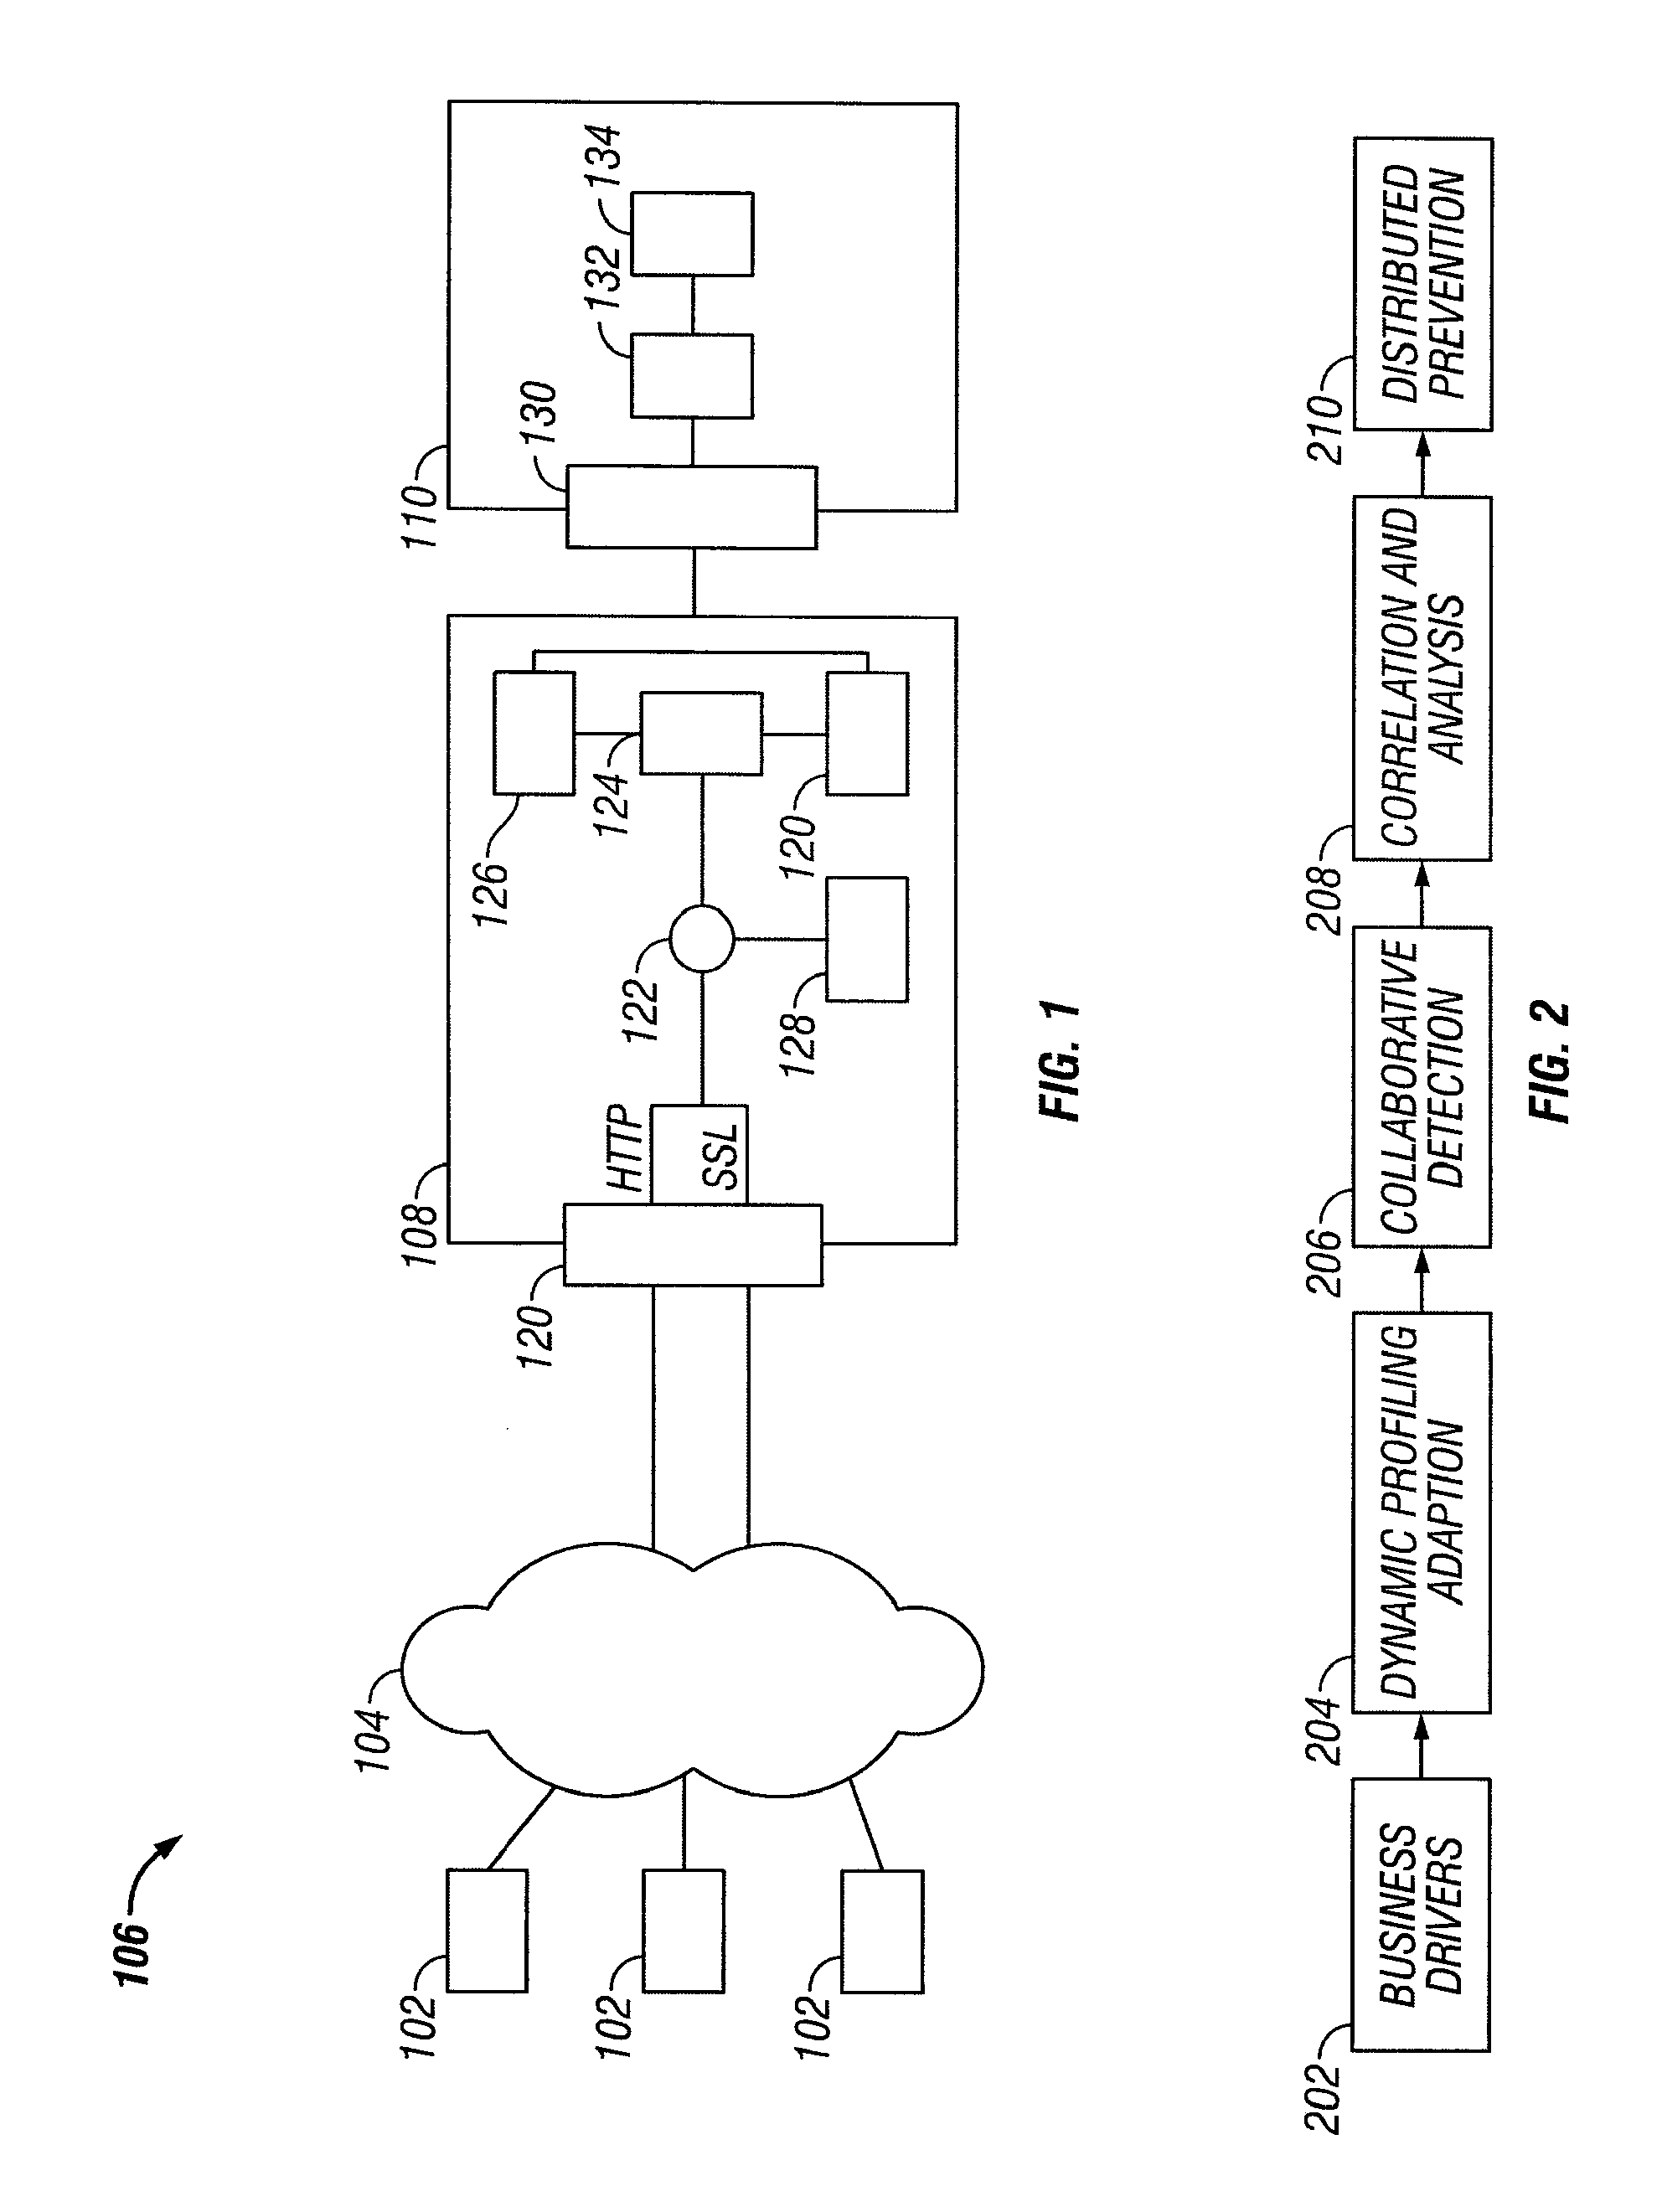 System and method of securing web applications across an enterprise